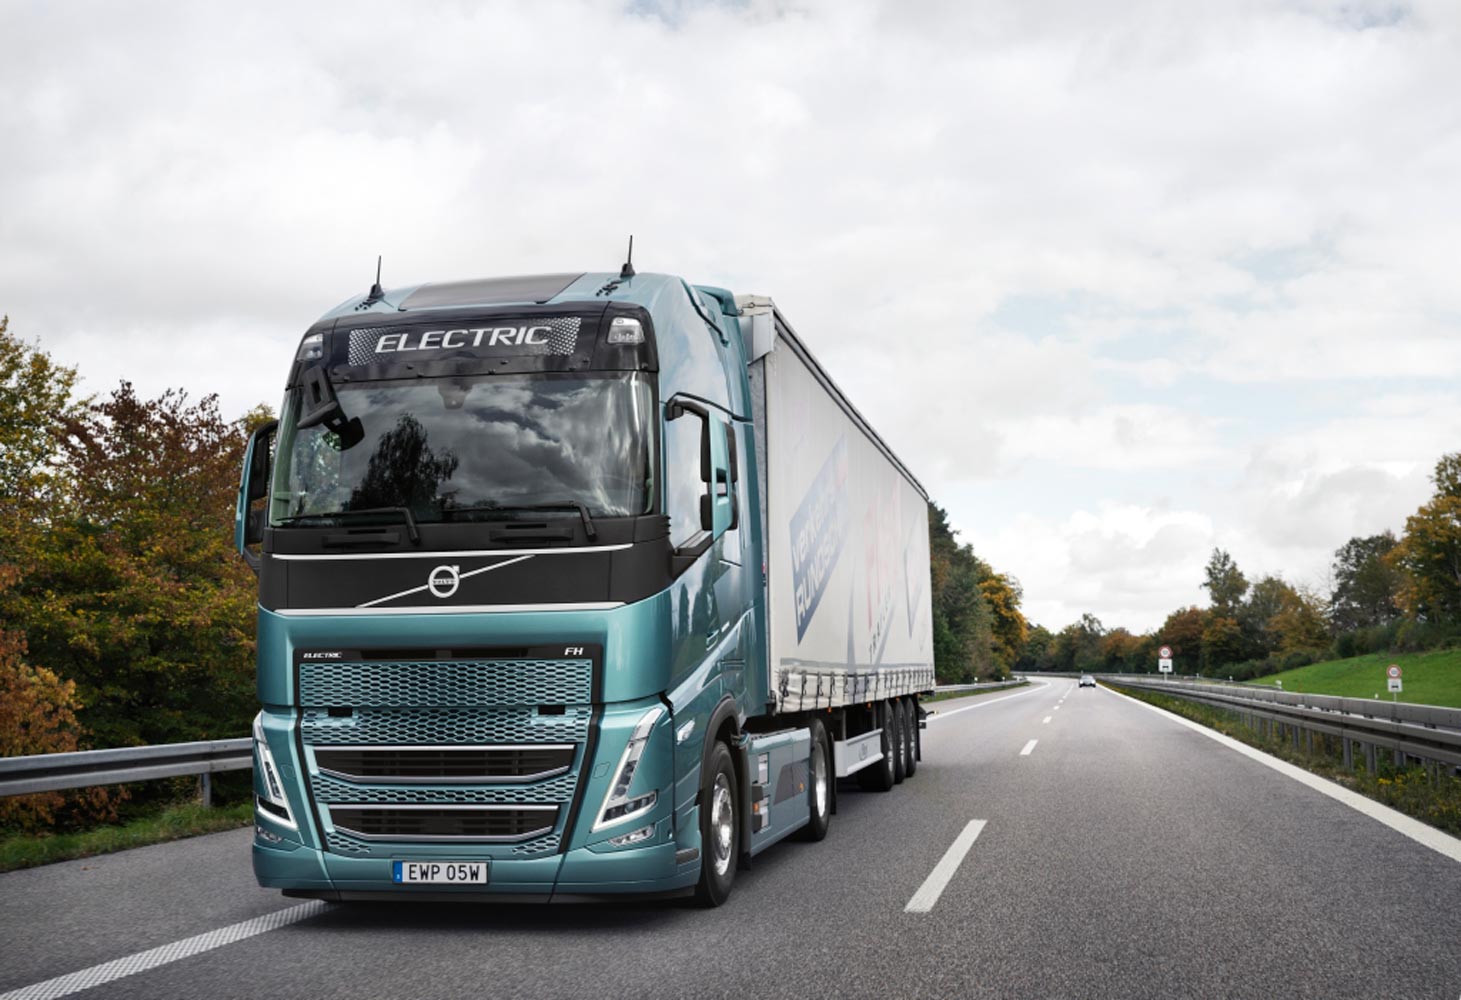 Volvo Trucks leads in Europe for heavy all-electric trucks